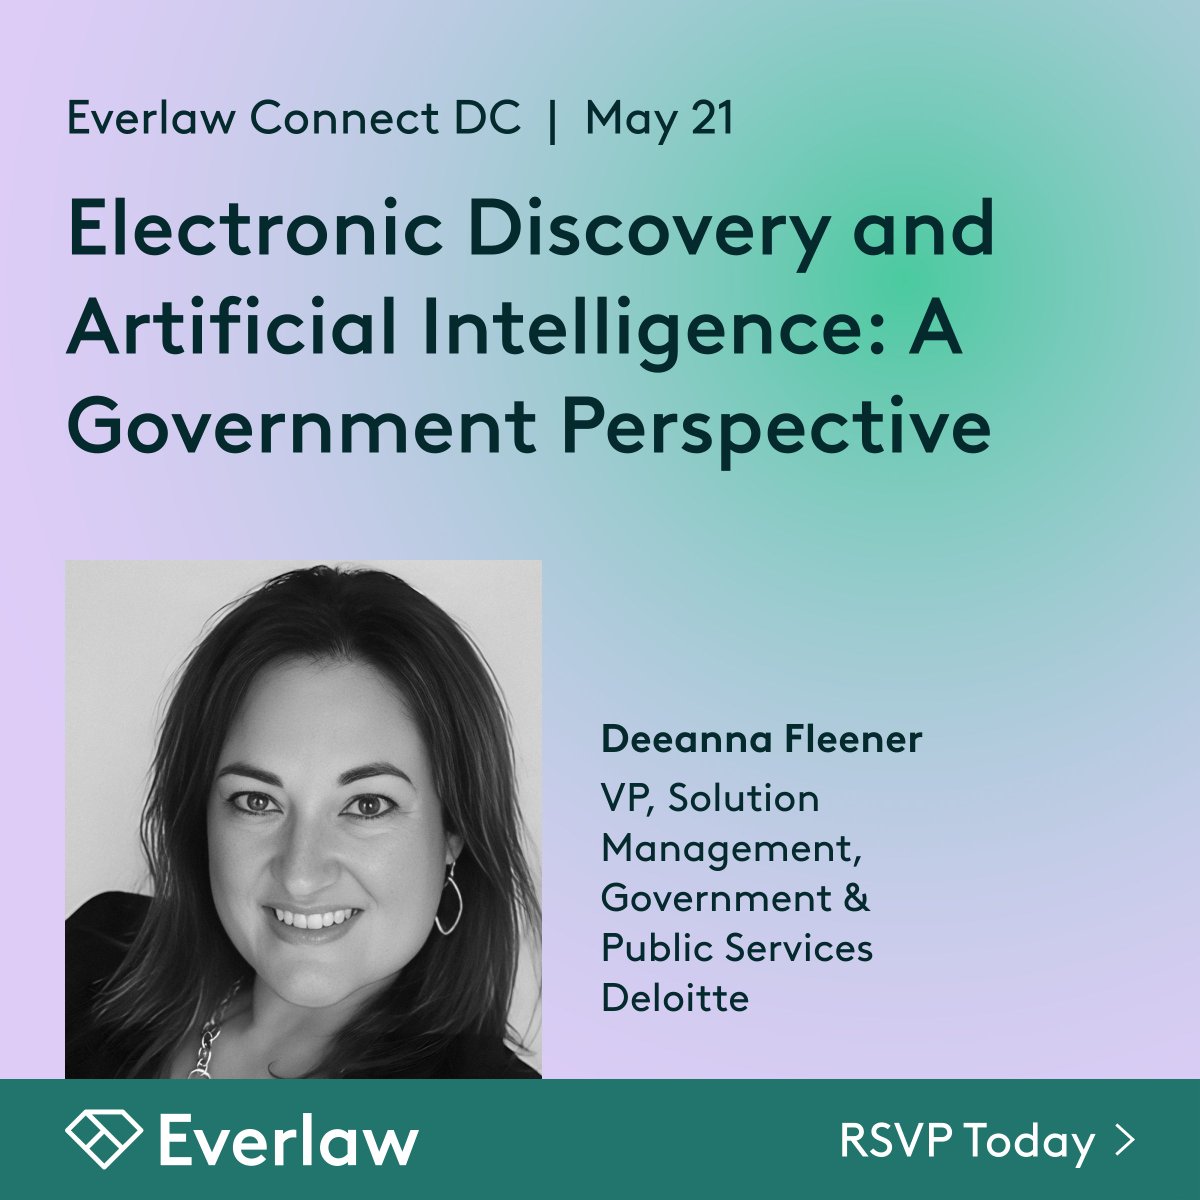 Deeanna Fleener, VP Solution Management, Government & Public Services at @Deloitte will be moderating a panel on #ediscovery and #AI from a government perspective at @Everlaw Connect D.C. - May 21, 2024, Washington, D.C.! Register now > everlaw.com/connect/washin… #LegalTech